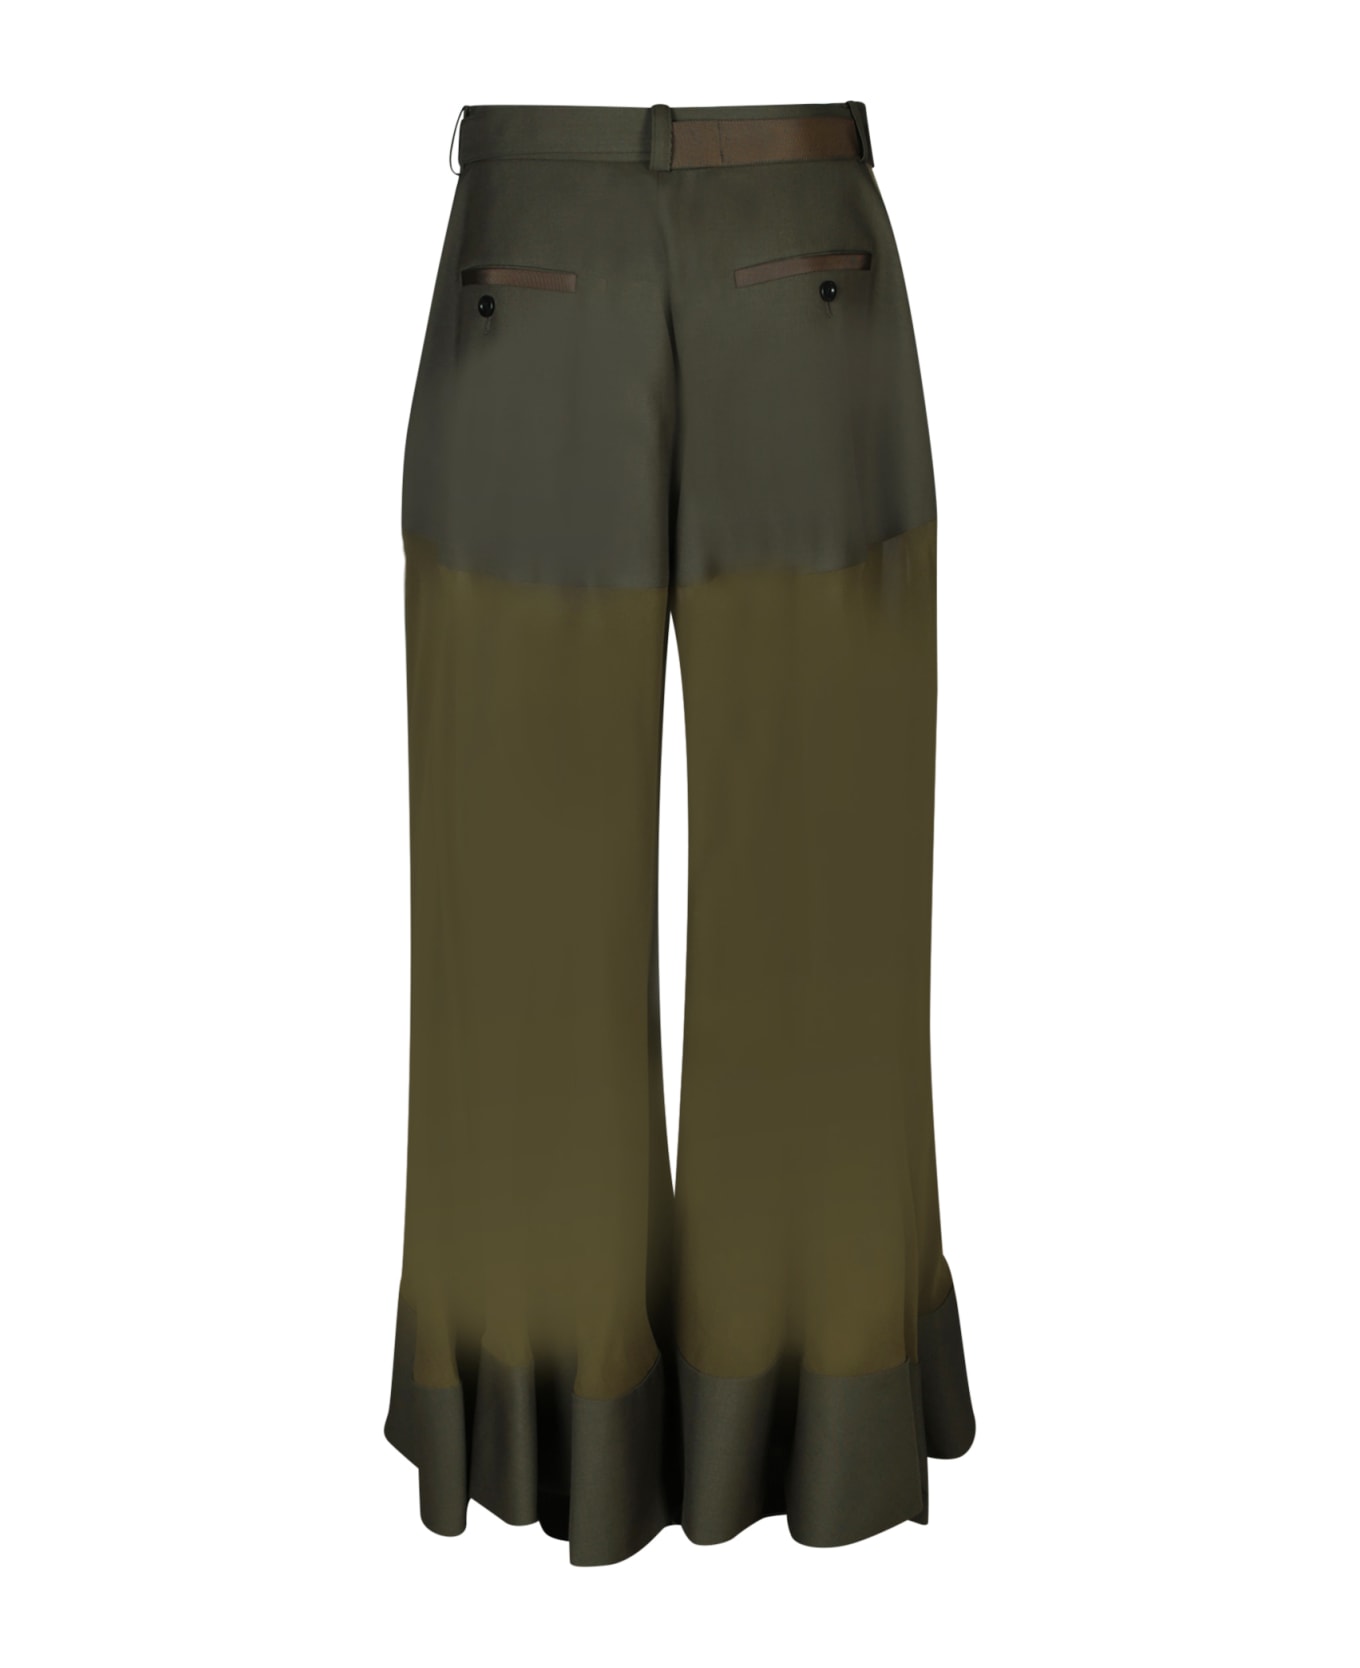 Sacai Suited Mix Khaki Trousers - Green ボトムス